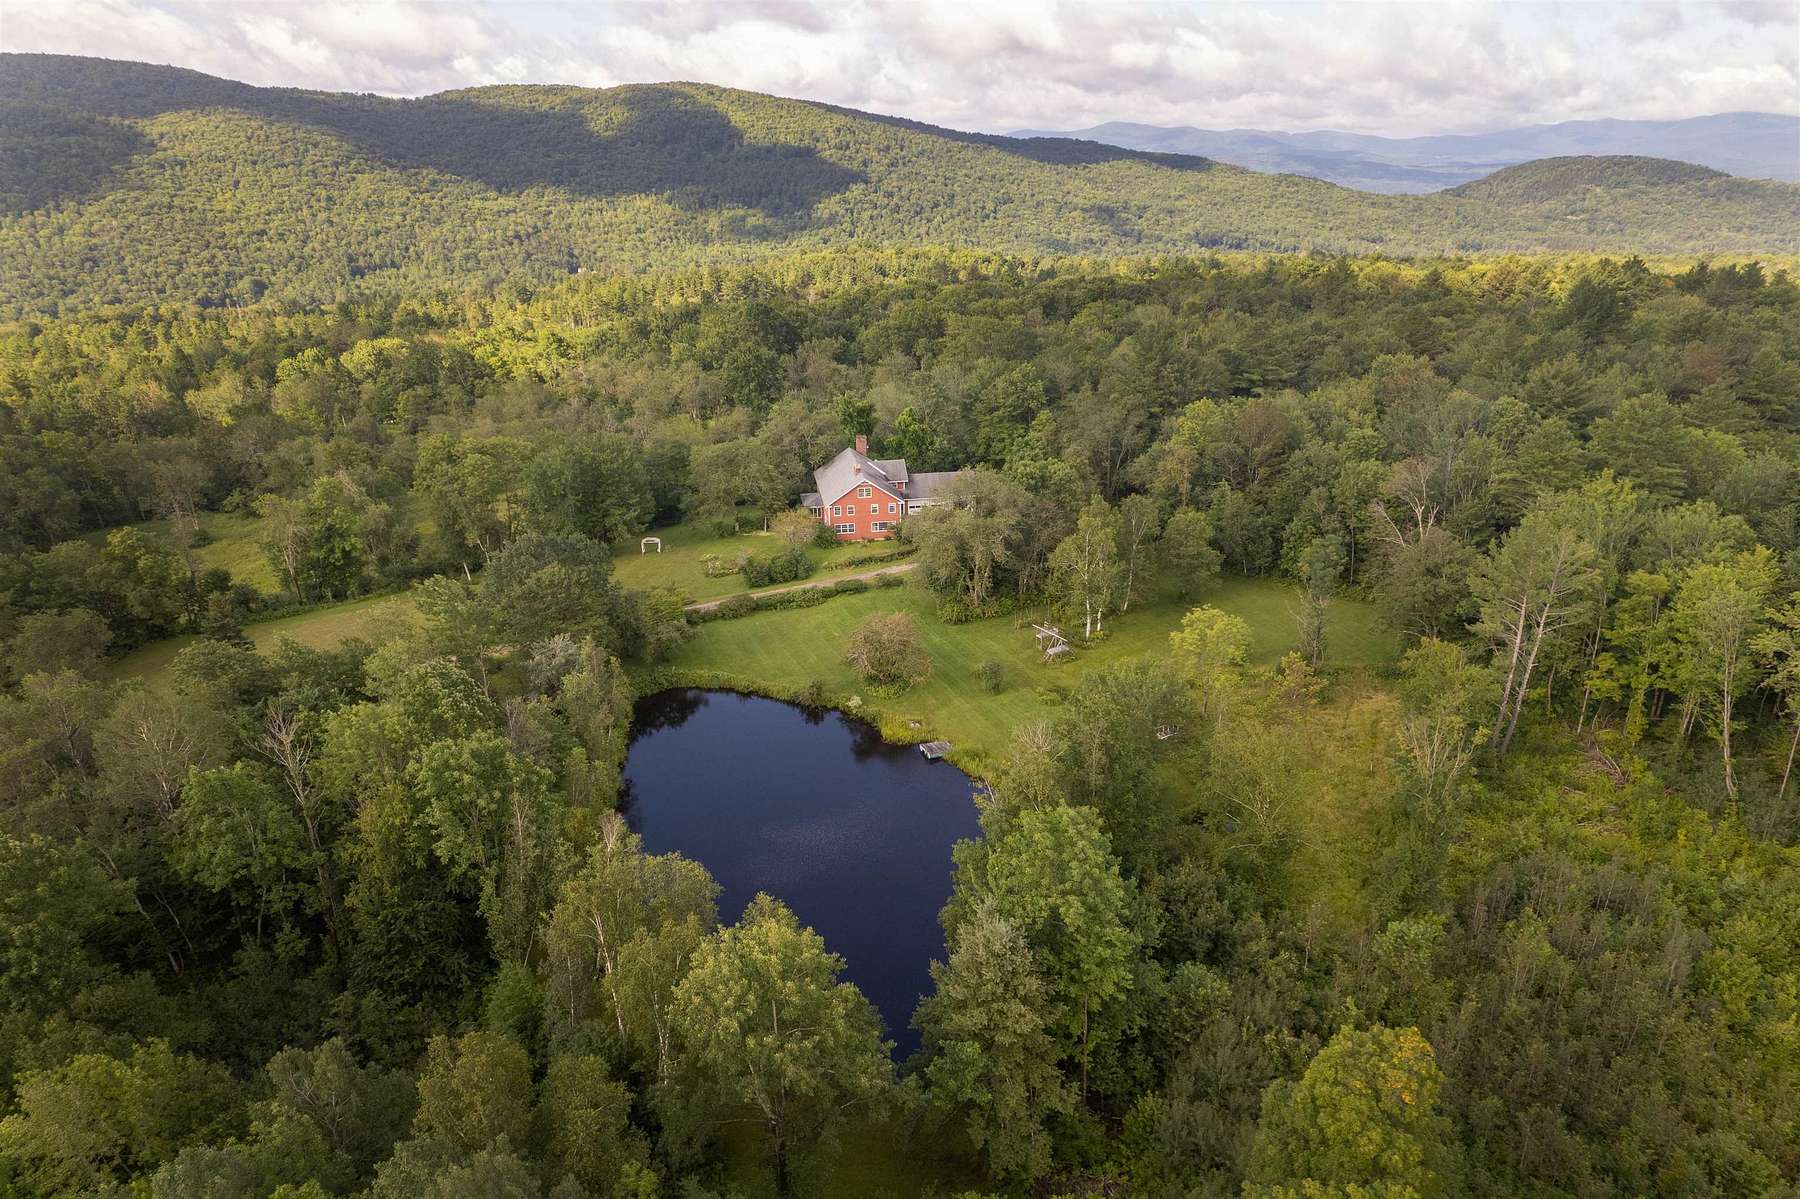 197 Acres of Agricultural Land with Home for Sale in Shrewsbury, Vermont